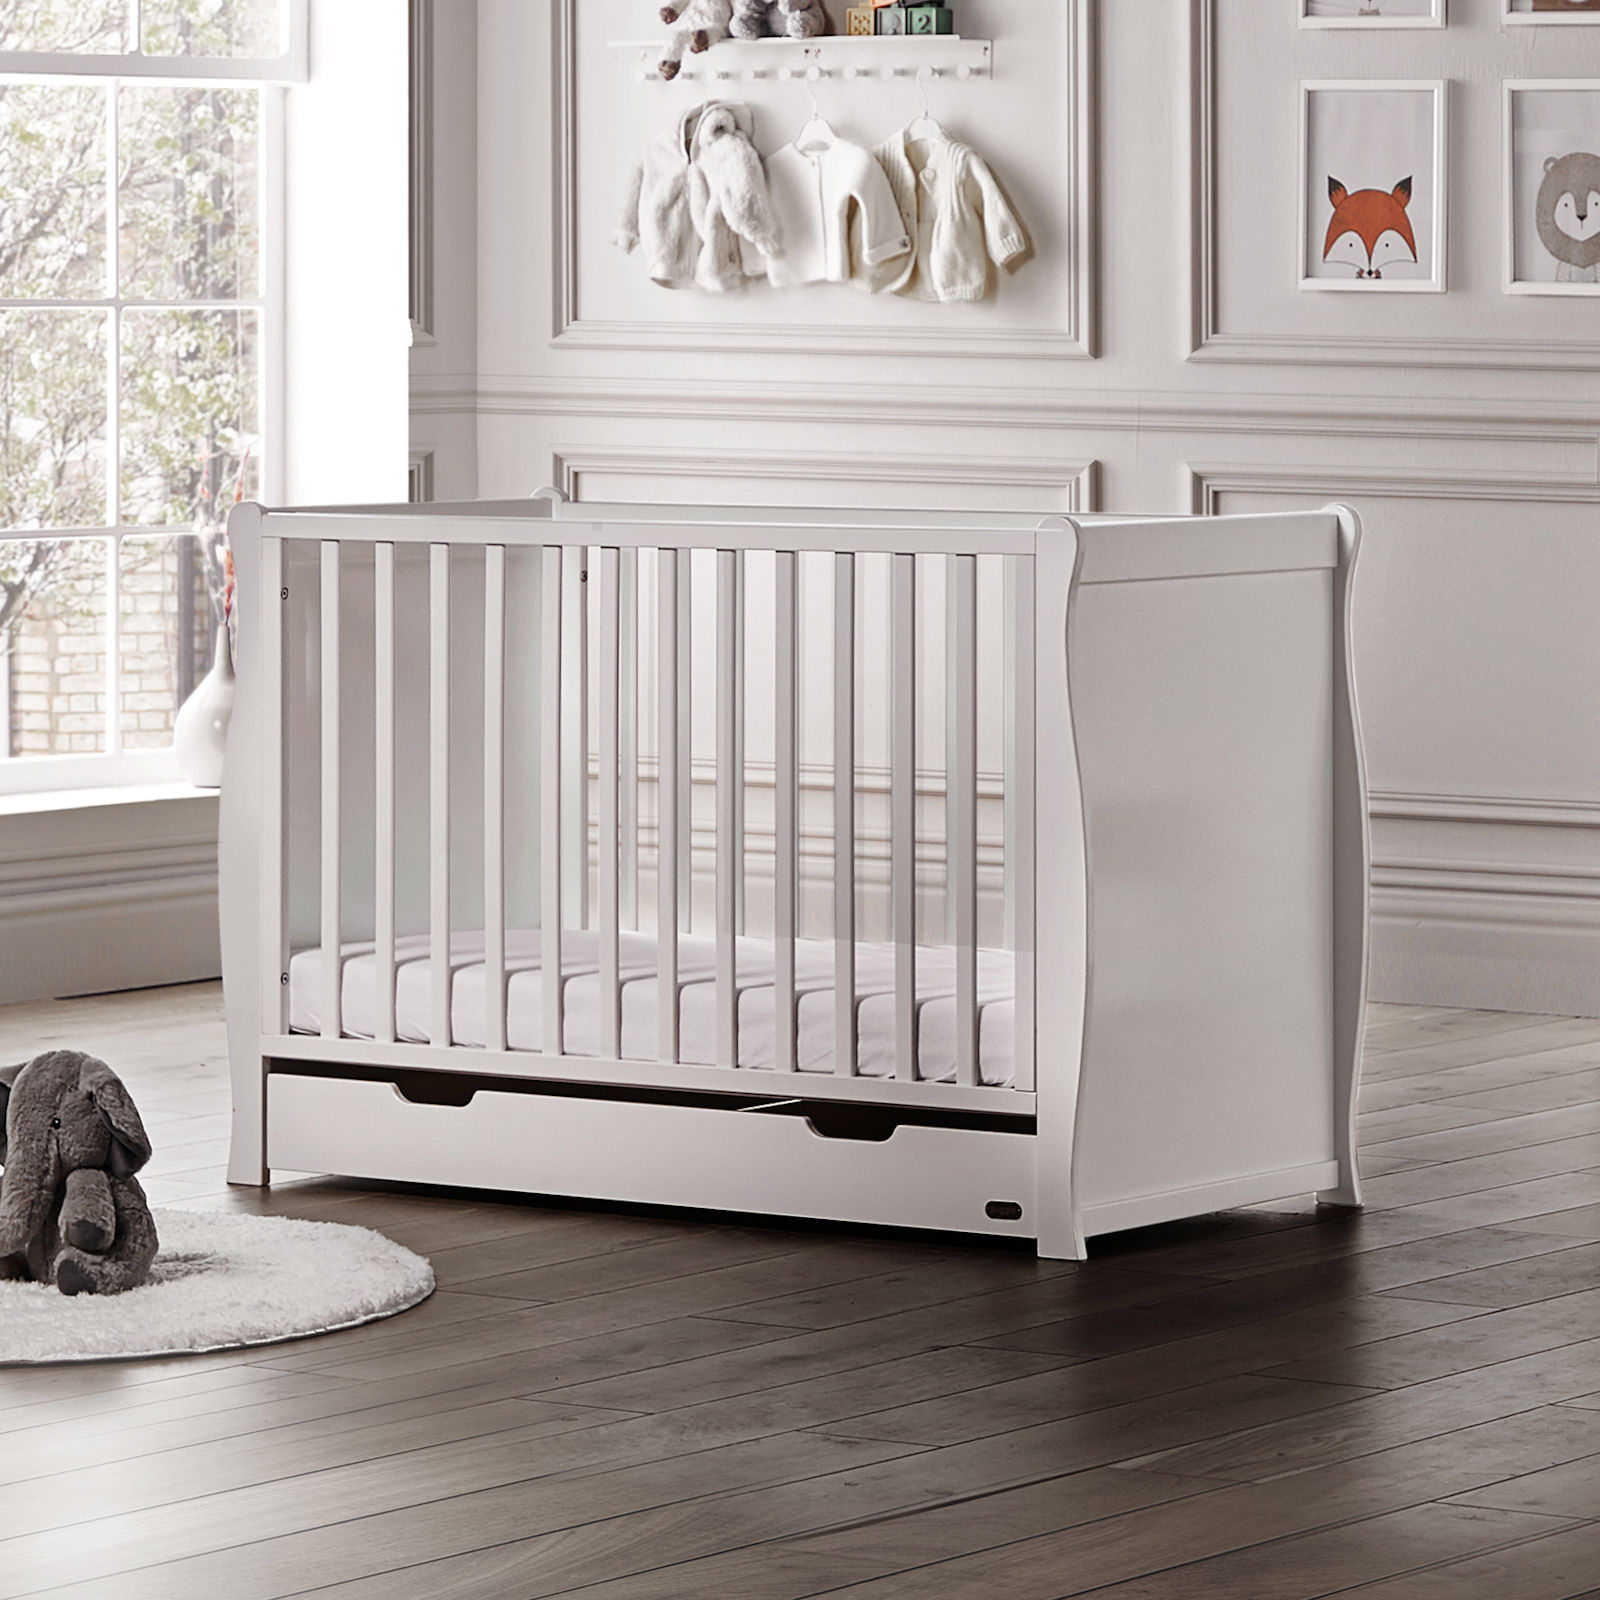 Puggle Chelford Sleigh Cot With Drawer & Eco Fibre Mattress - White